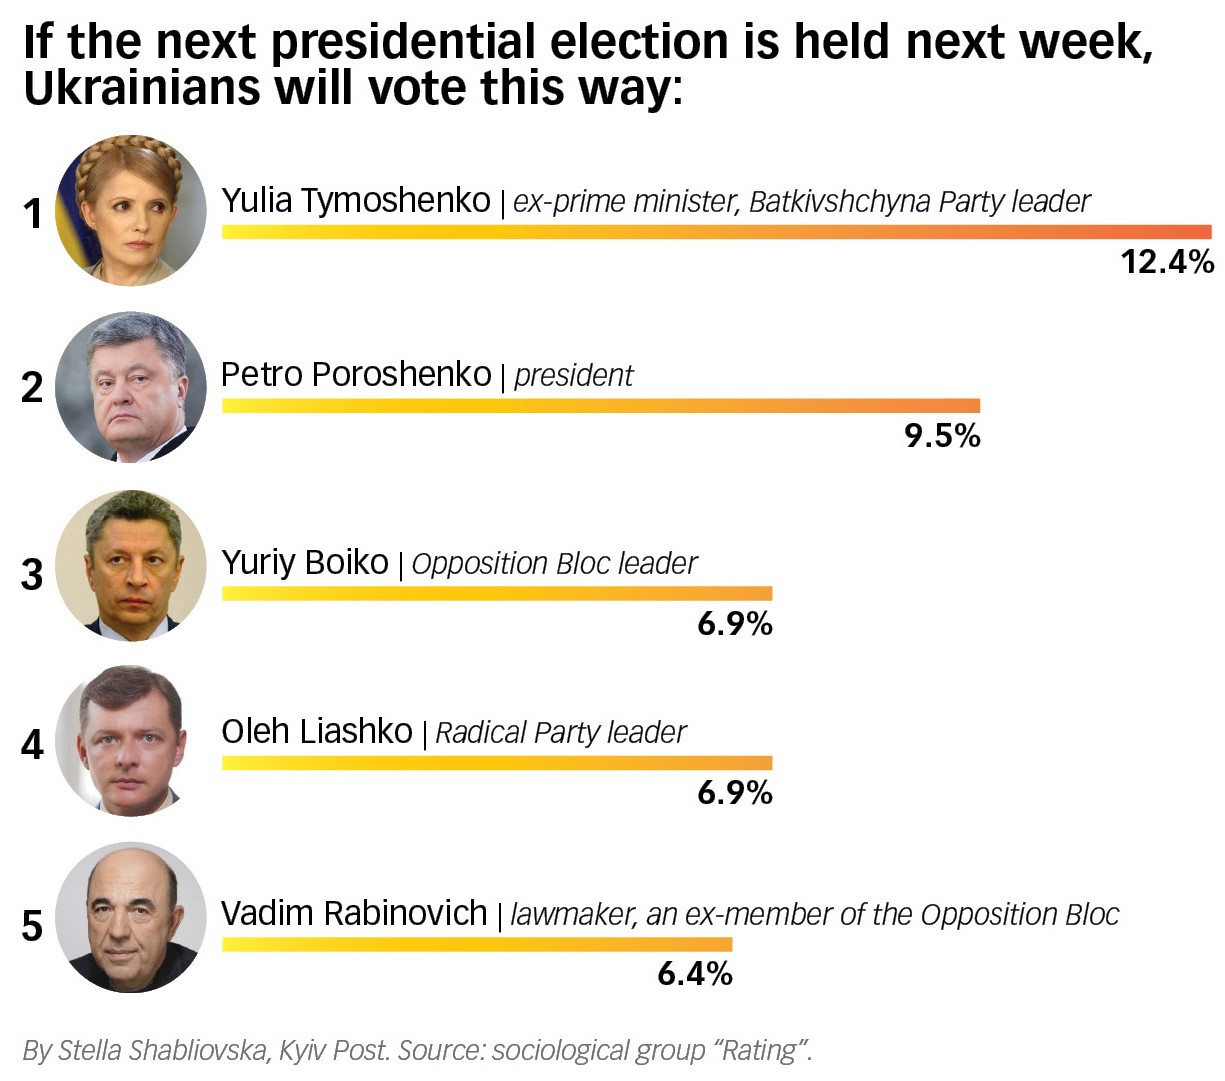 President Petro Poroshenko lags behind ex-Prime Minister Yulia Tymoshenko, but his competitors also have high disapproval ratings.